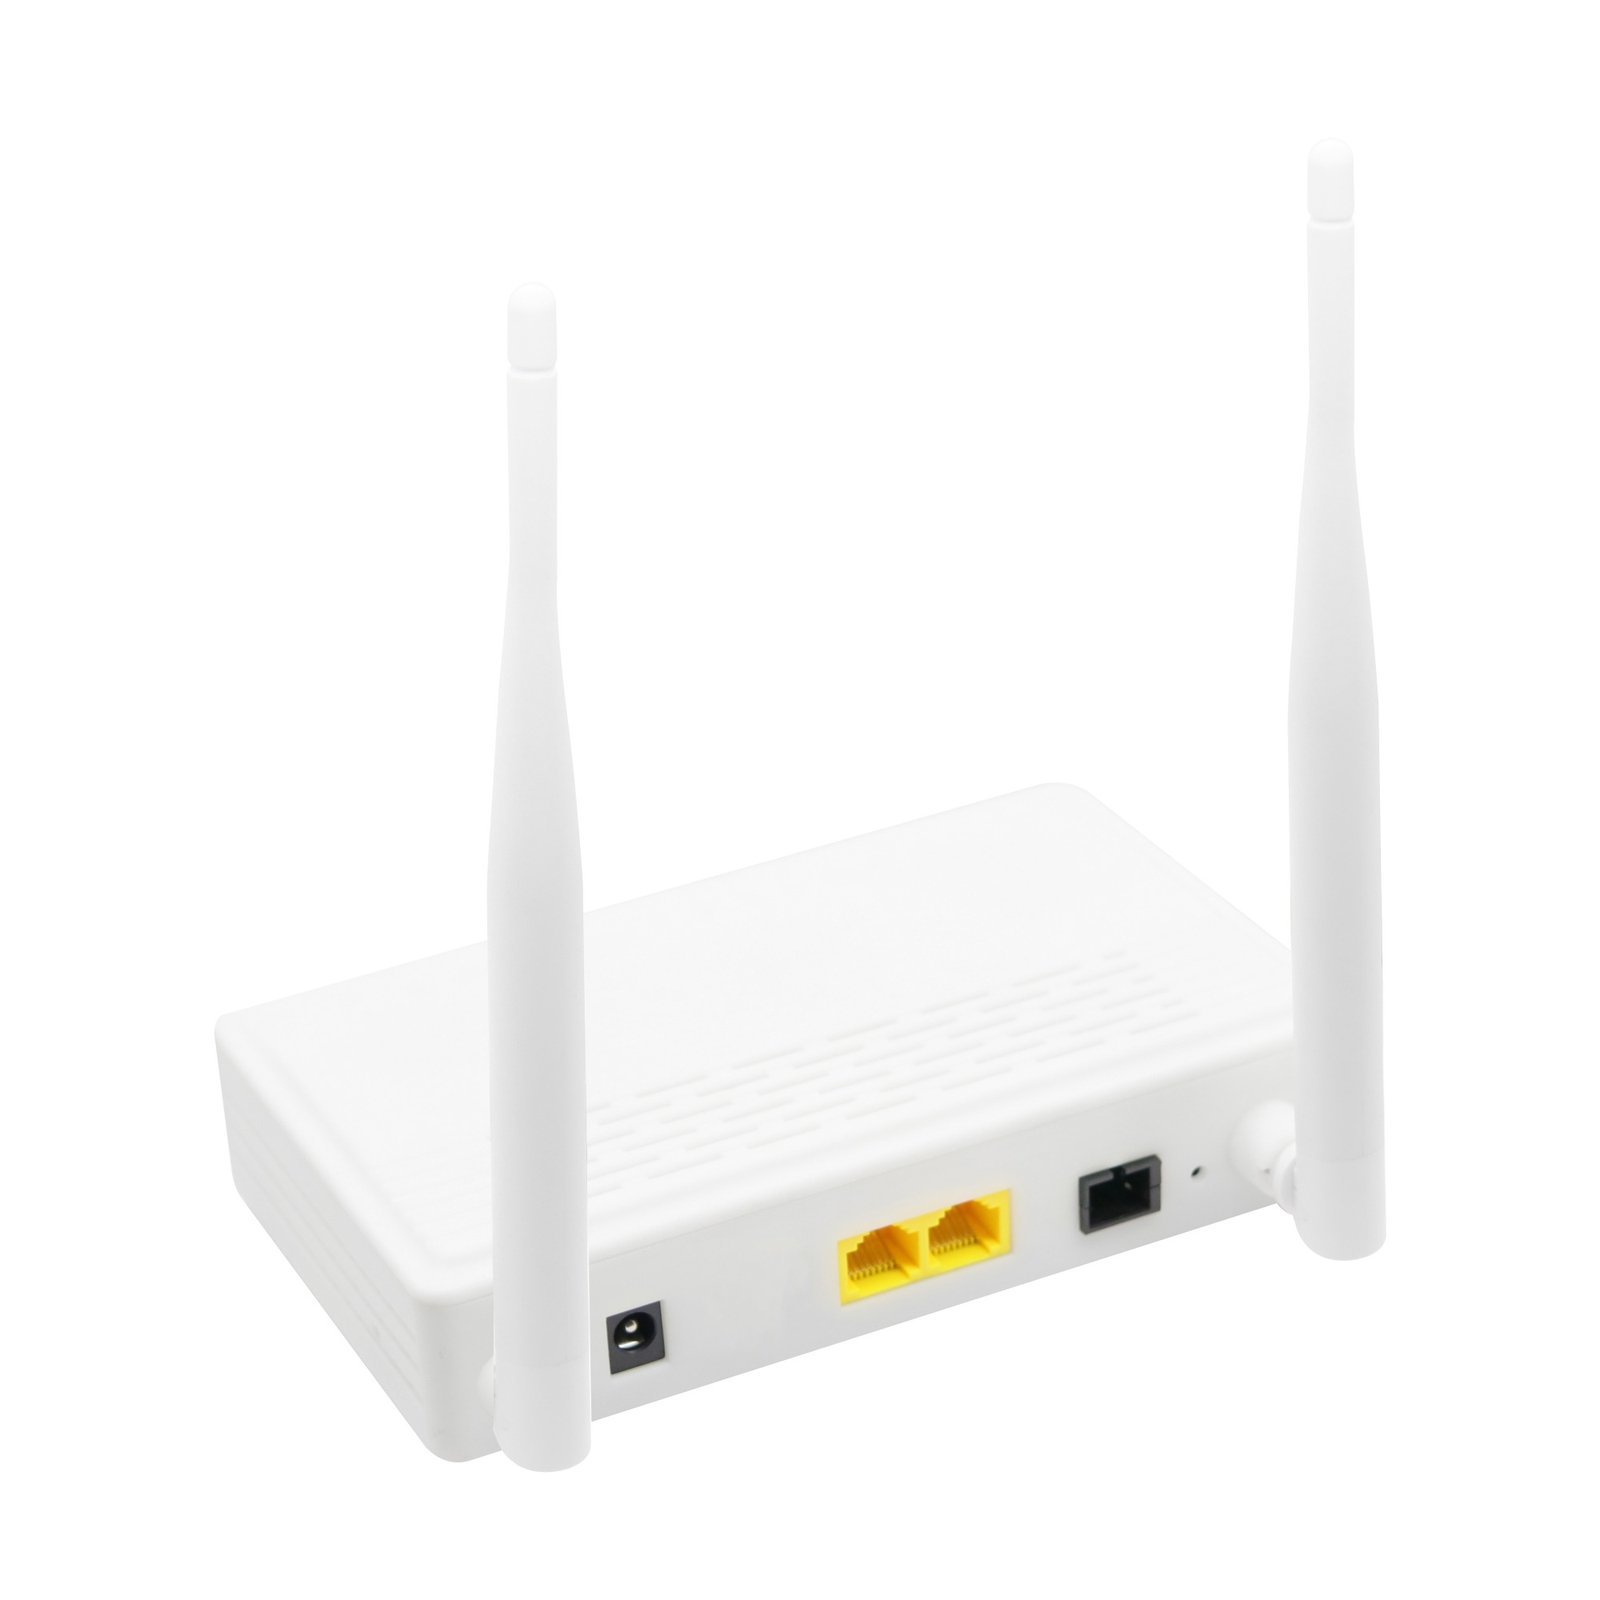 OEM Customized Opgw Specifications - QF-HE101W EPON ONU 1GE+1FE WIFI  EPON ONT – Qualfiber